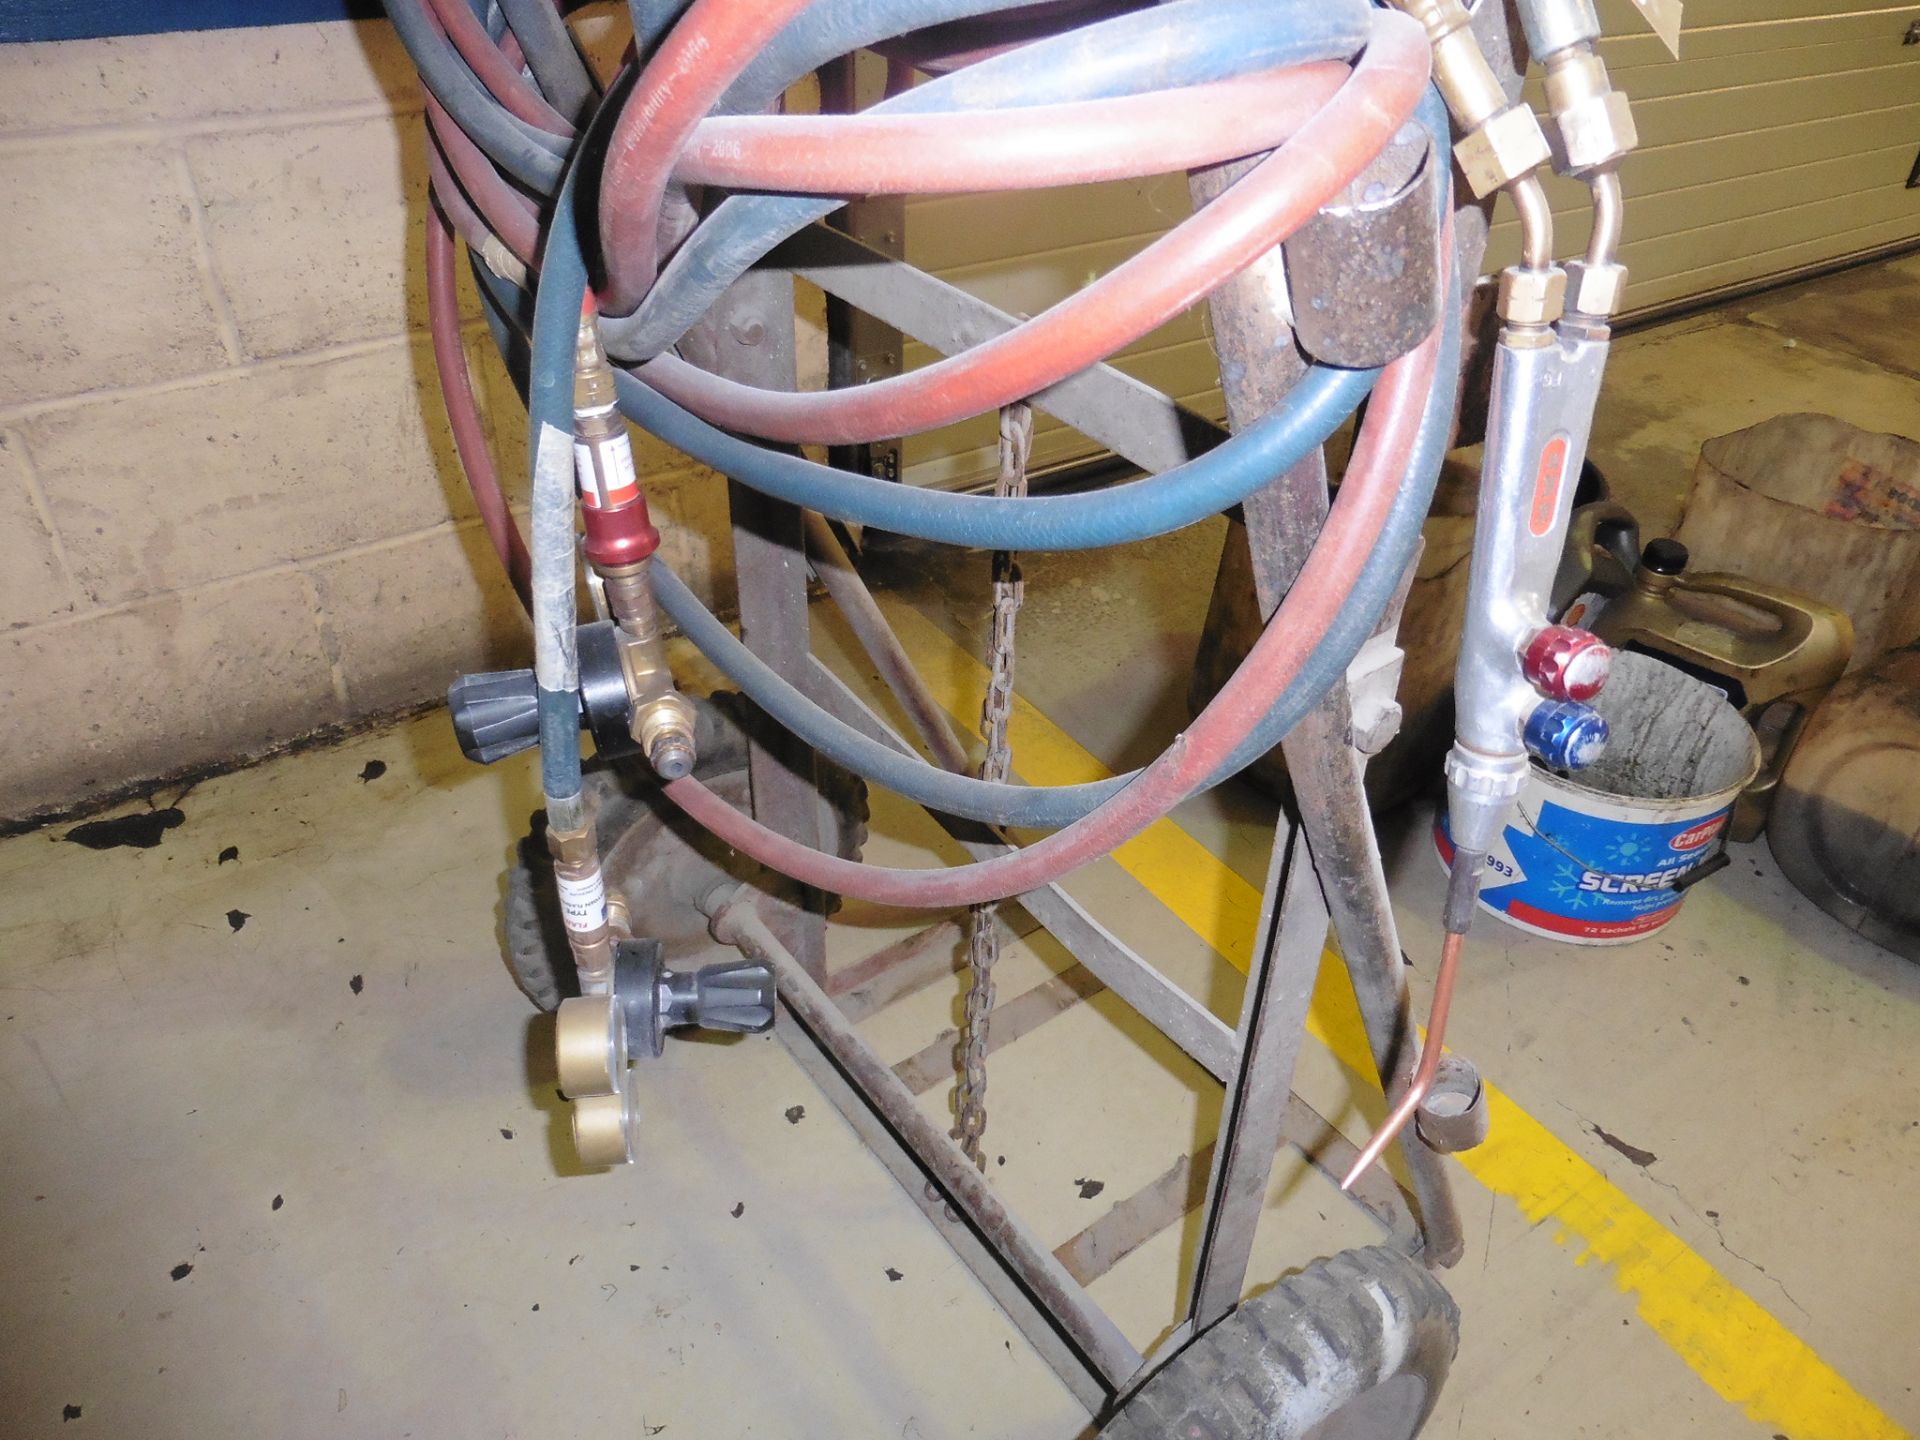 Set of oxy-acetylene welding gear with hose, gauges and trolley - Image 2 of 2